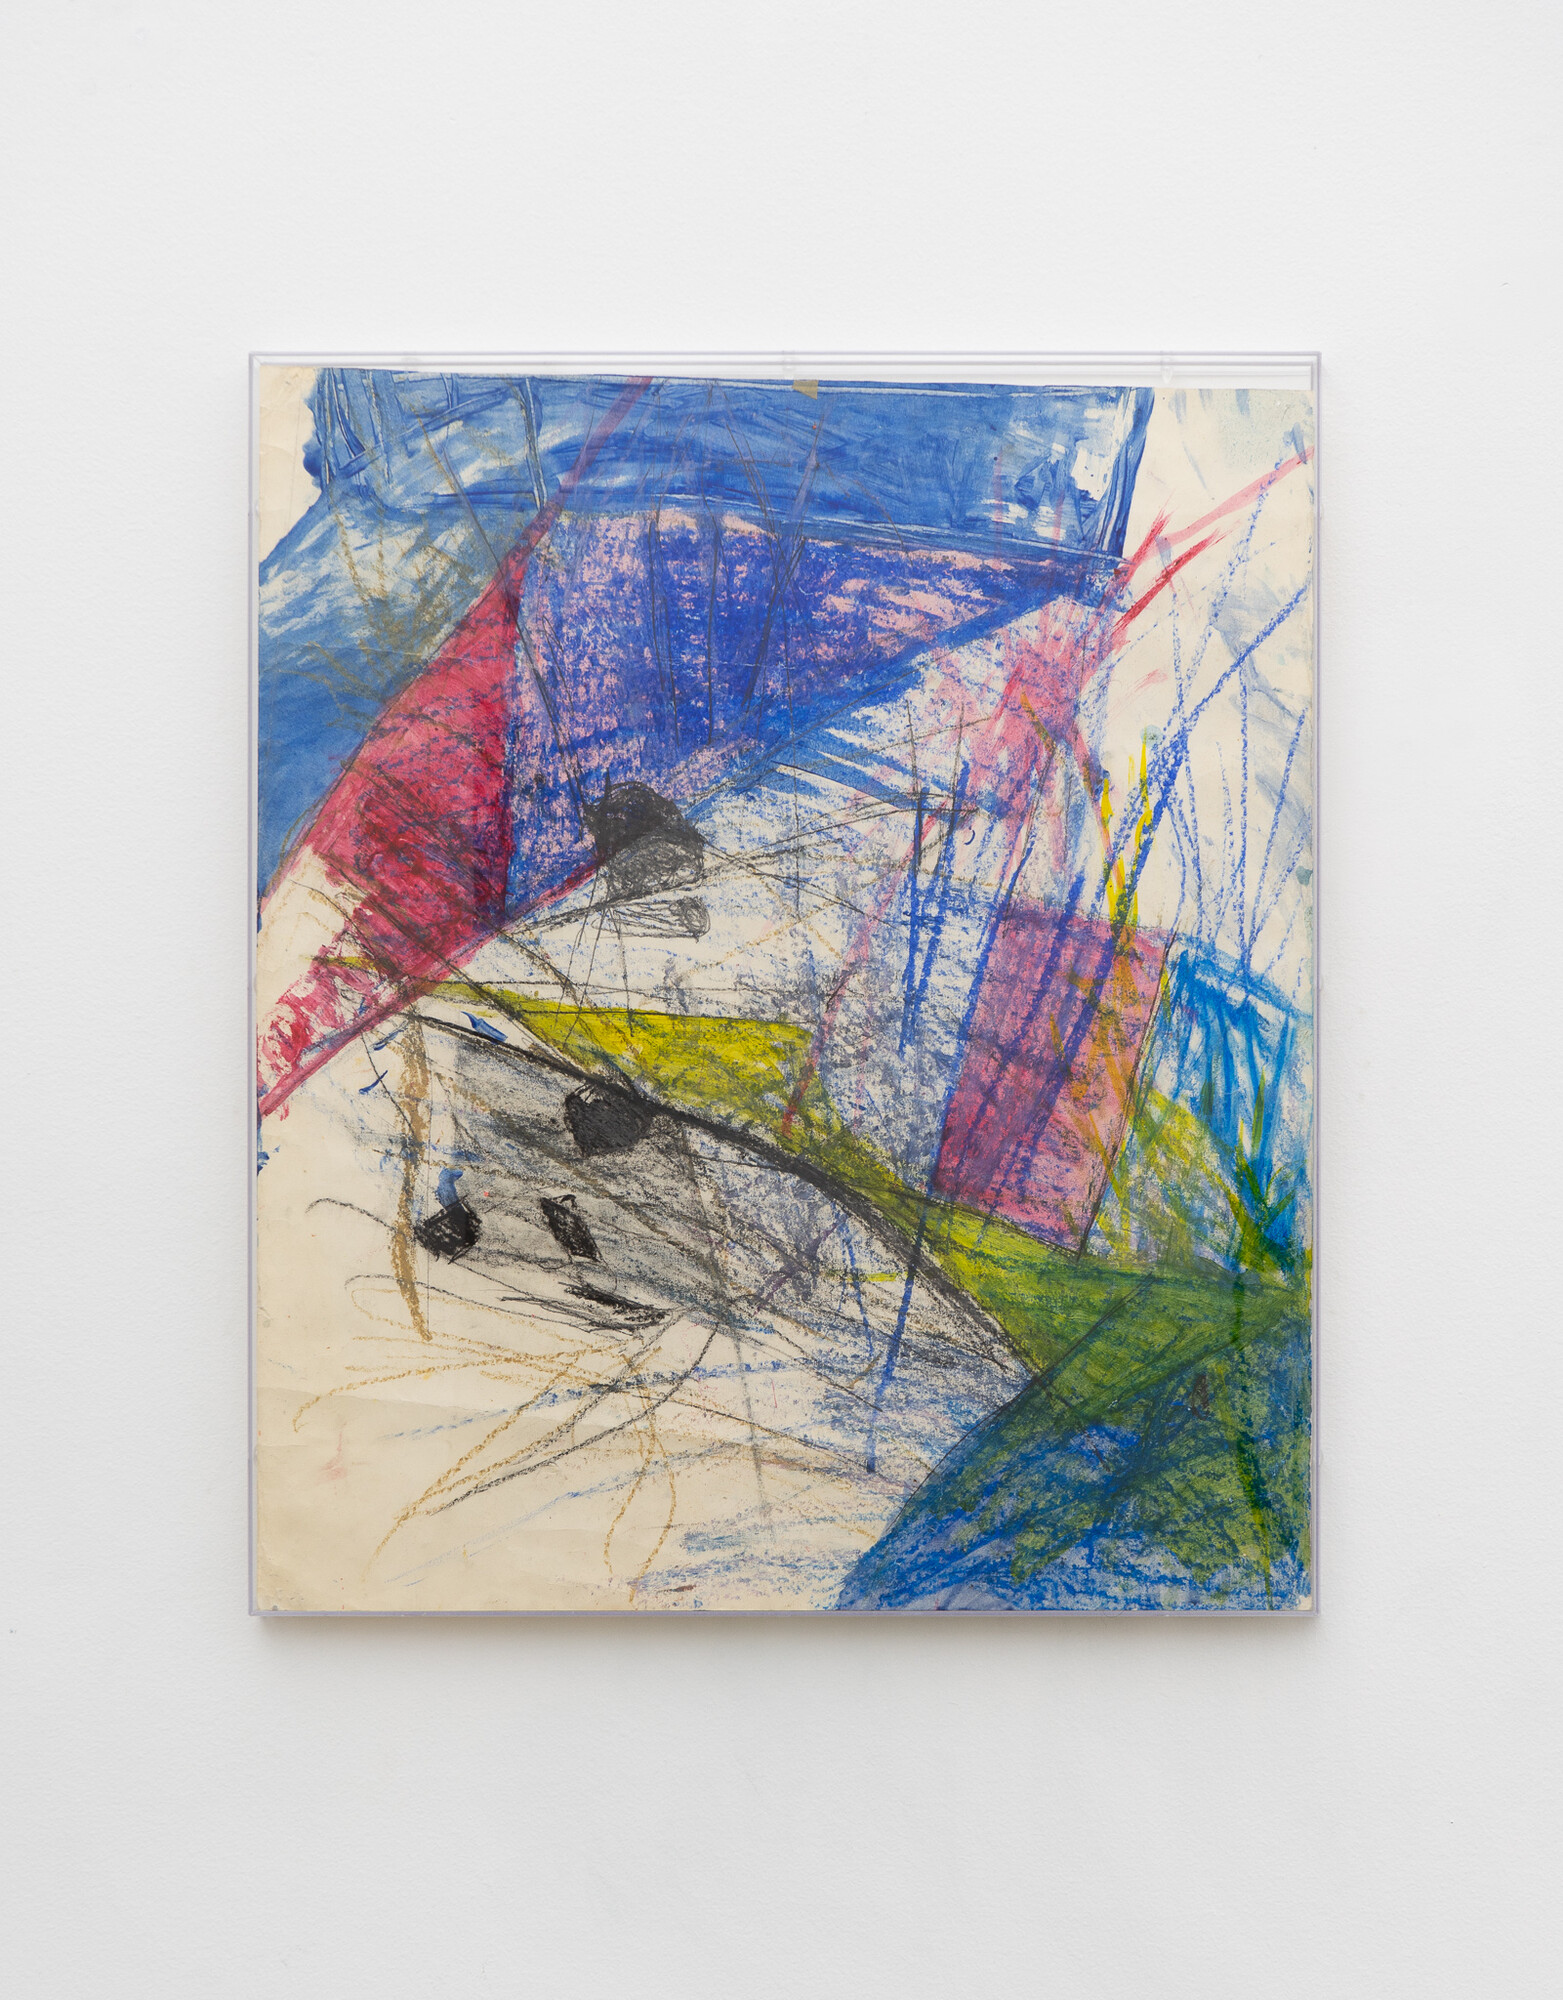 Lou Hubbard, <em>Grey</em>, 1976, oil pastel, crayon, acrylic and graphite on paper acrylic frame, 67 x 57 cm. Photo courtesy of Savage Garden.